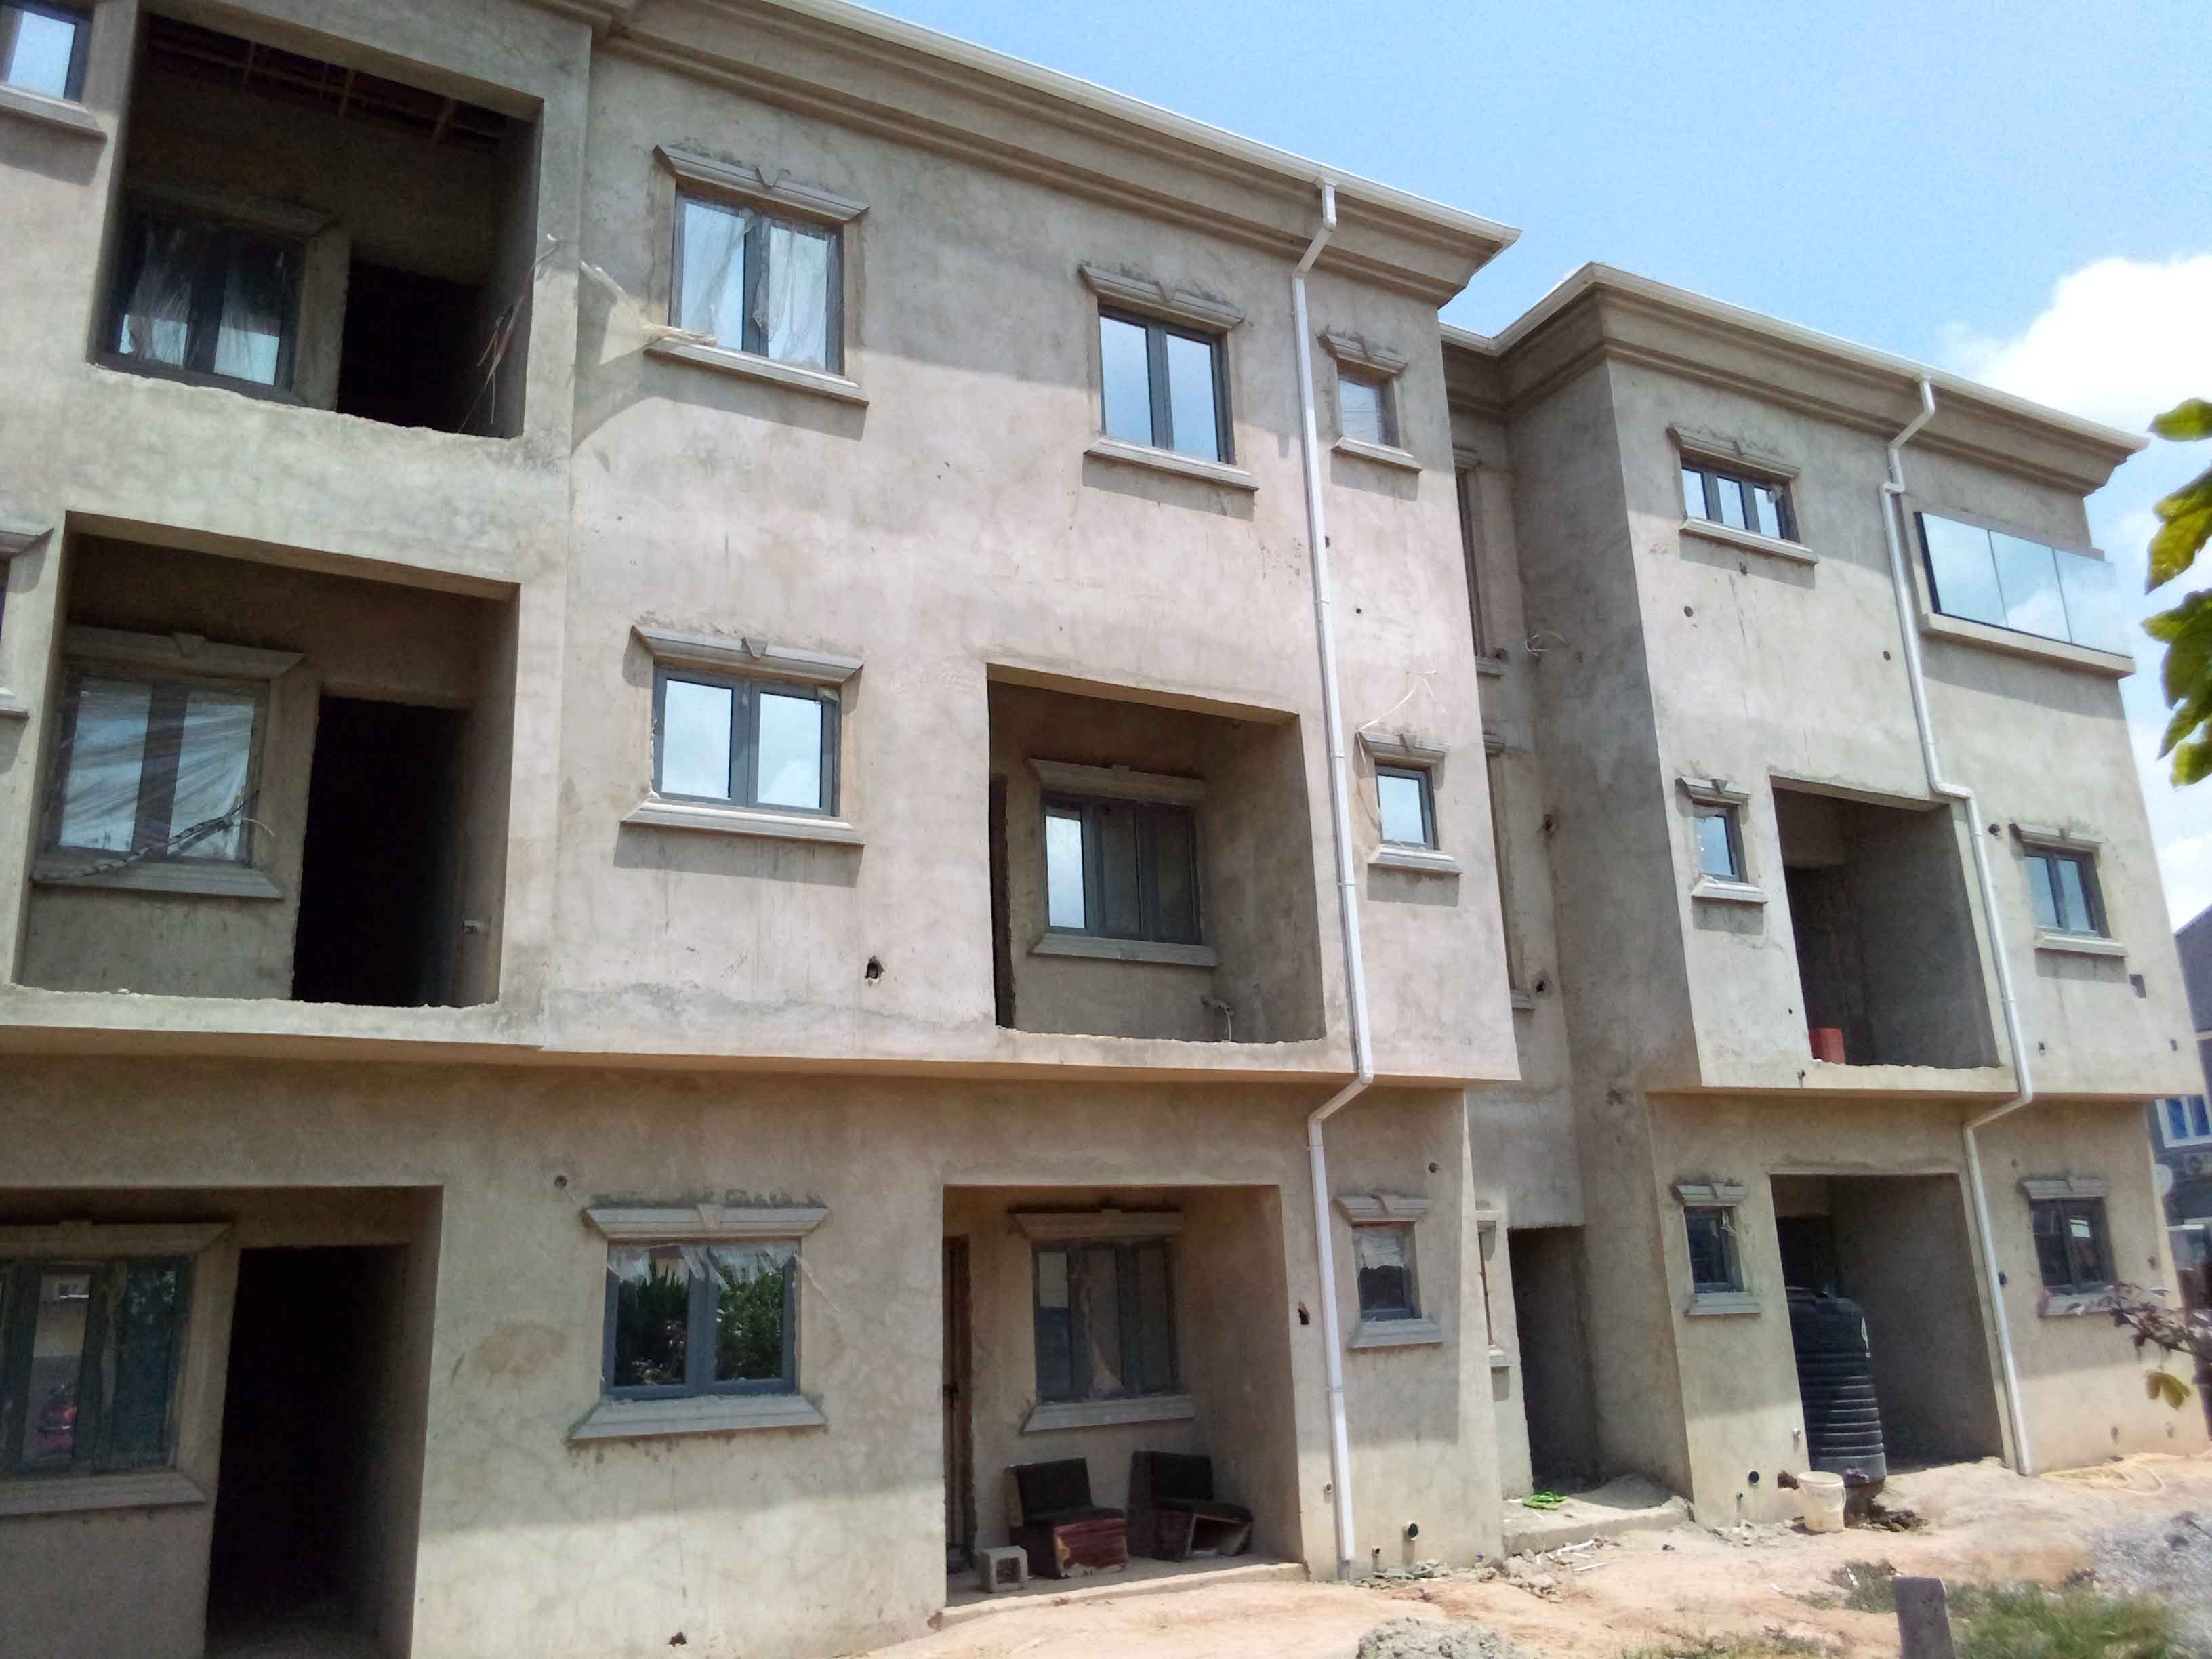 2 bedrooms Flat / Apartment for sale at Akowonjo